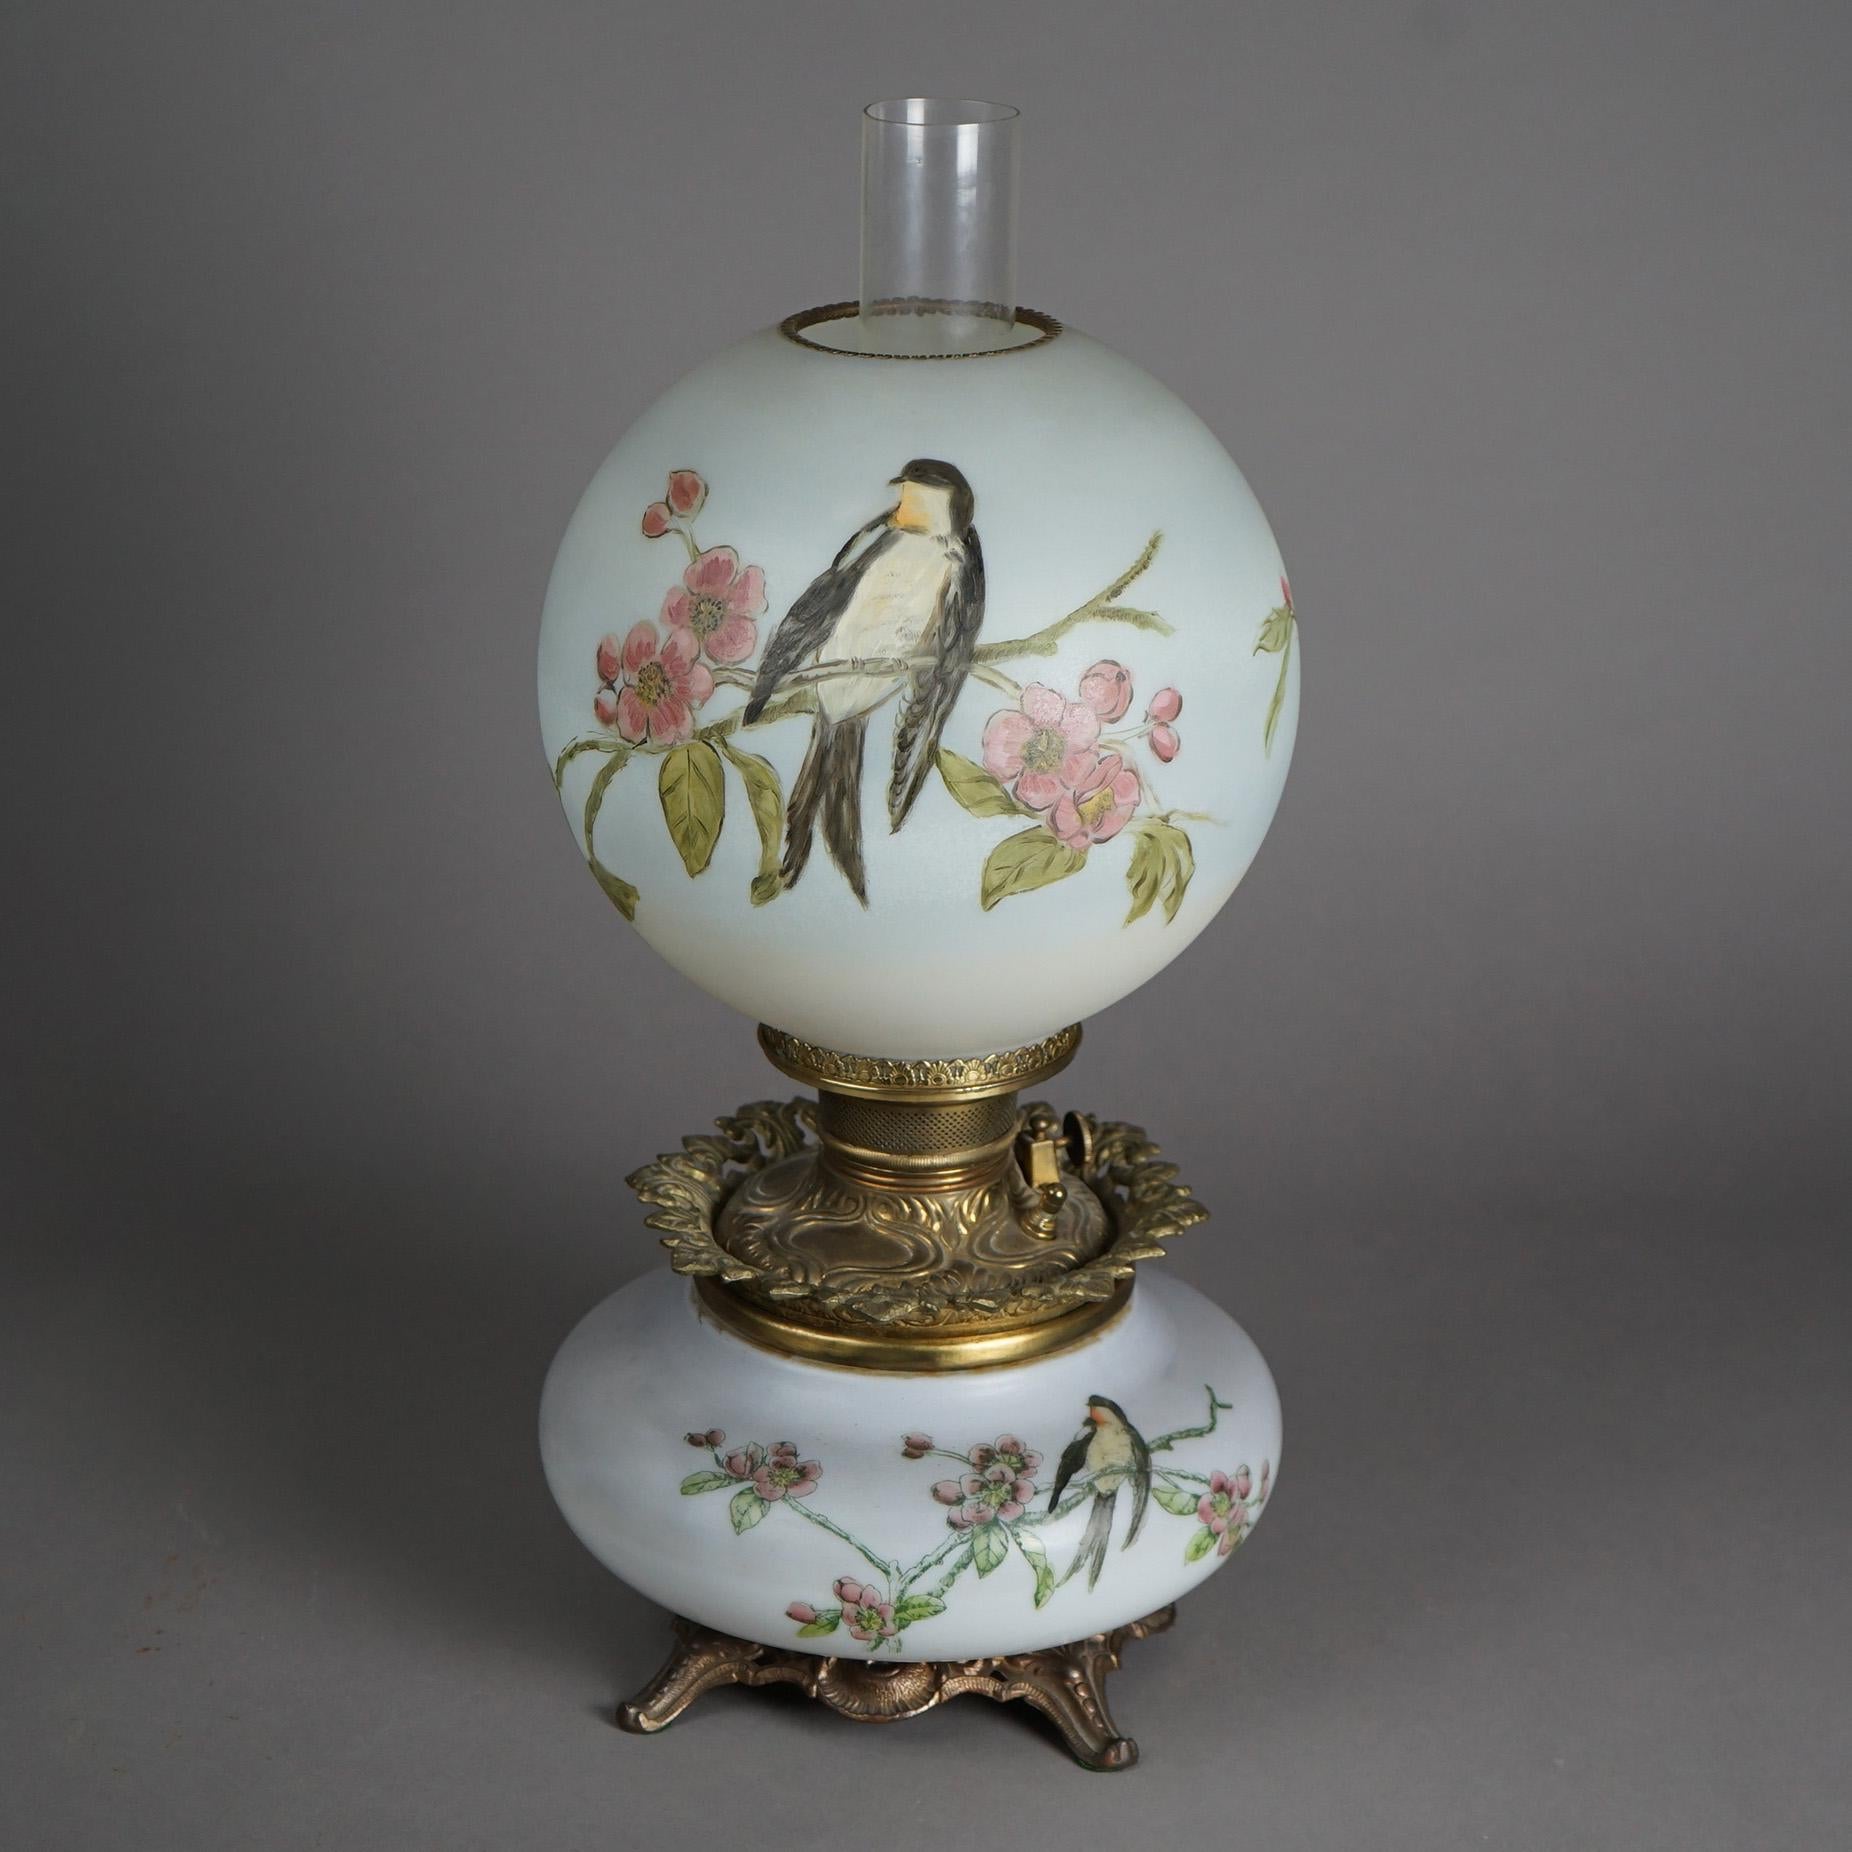 An antique Victorian Gone With The Wind parlor lamp offers glass shade and base with hand painted swallow and flowers, c1890

Measures- 21.5''H x 9.75''W x 9.75''D